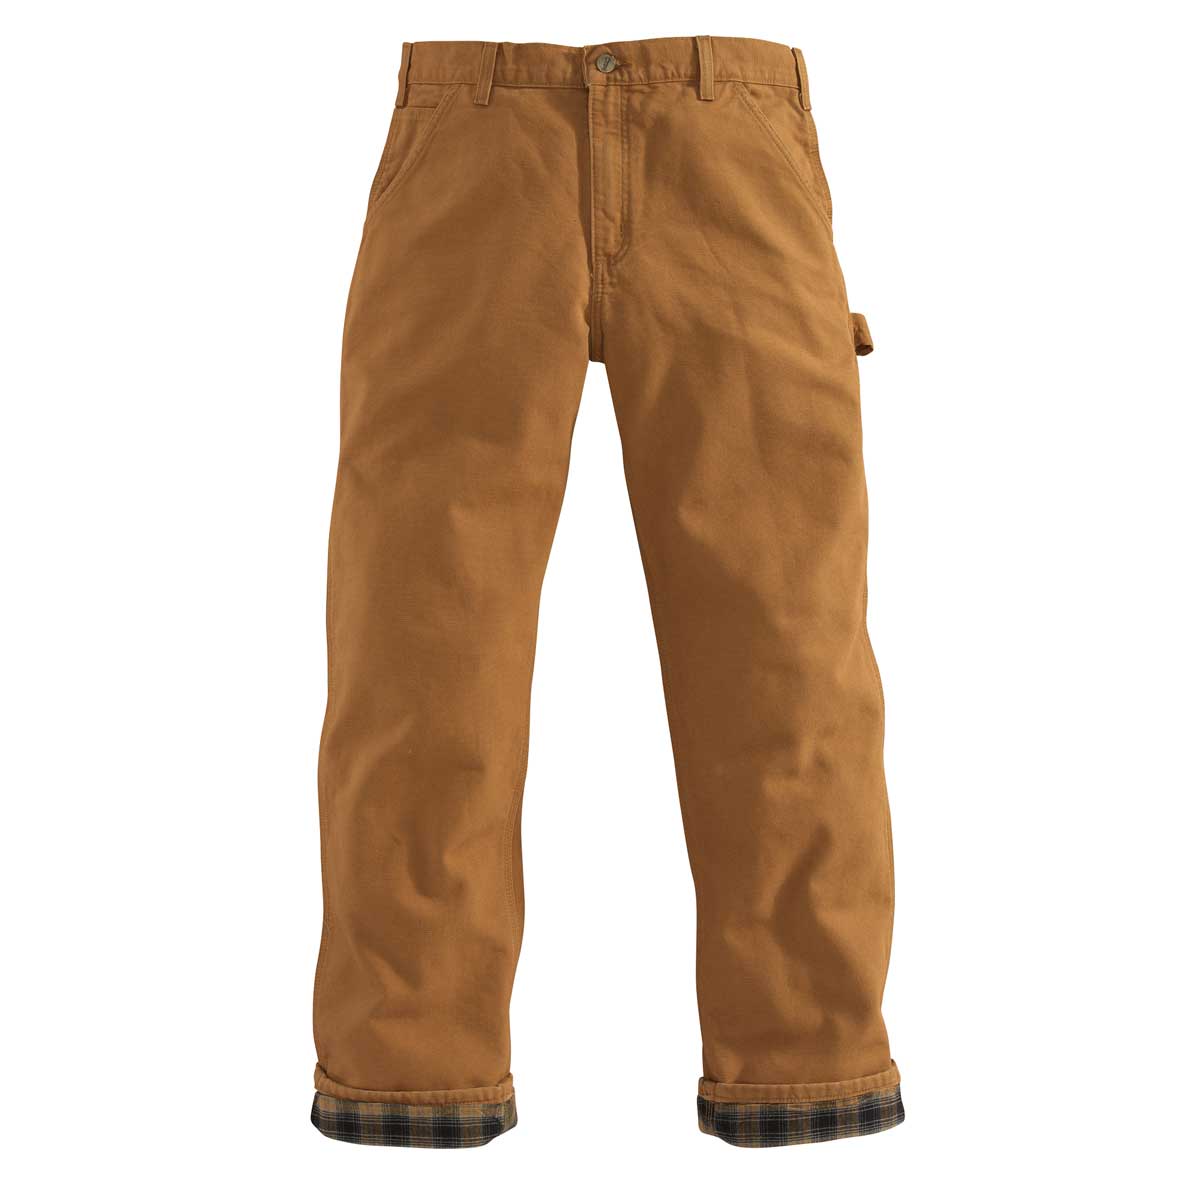 Carhartt B111 Loose Fit Washed Duck Flannel-Lined Utility Work Pant